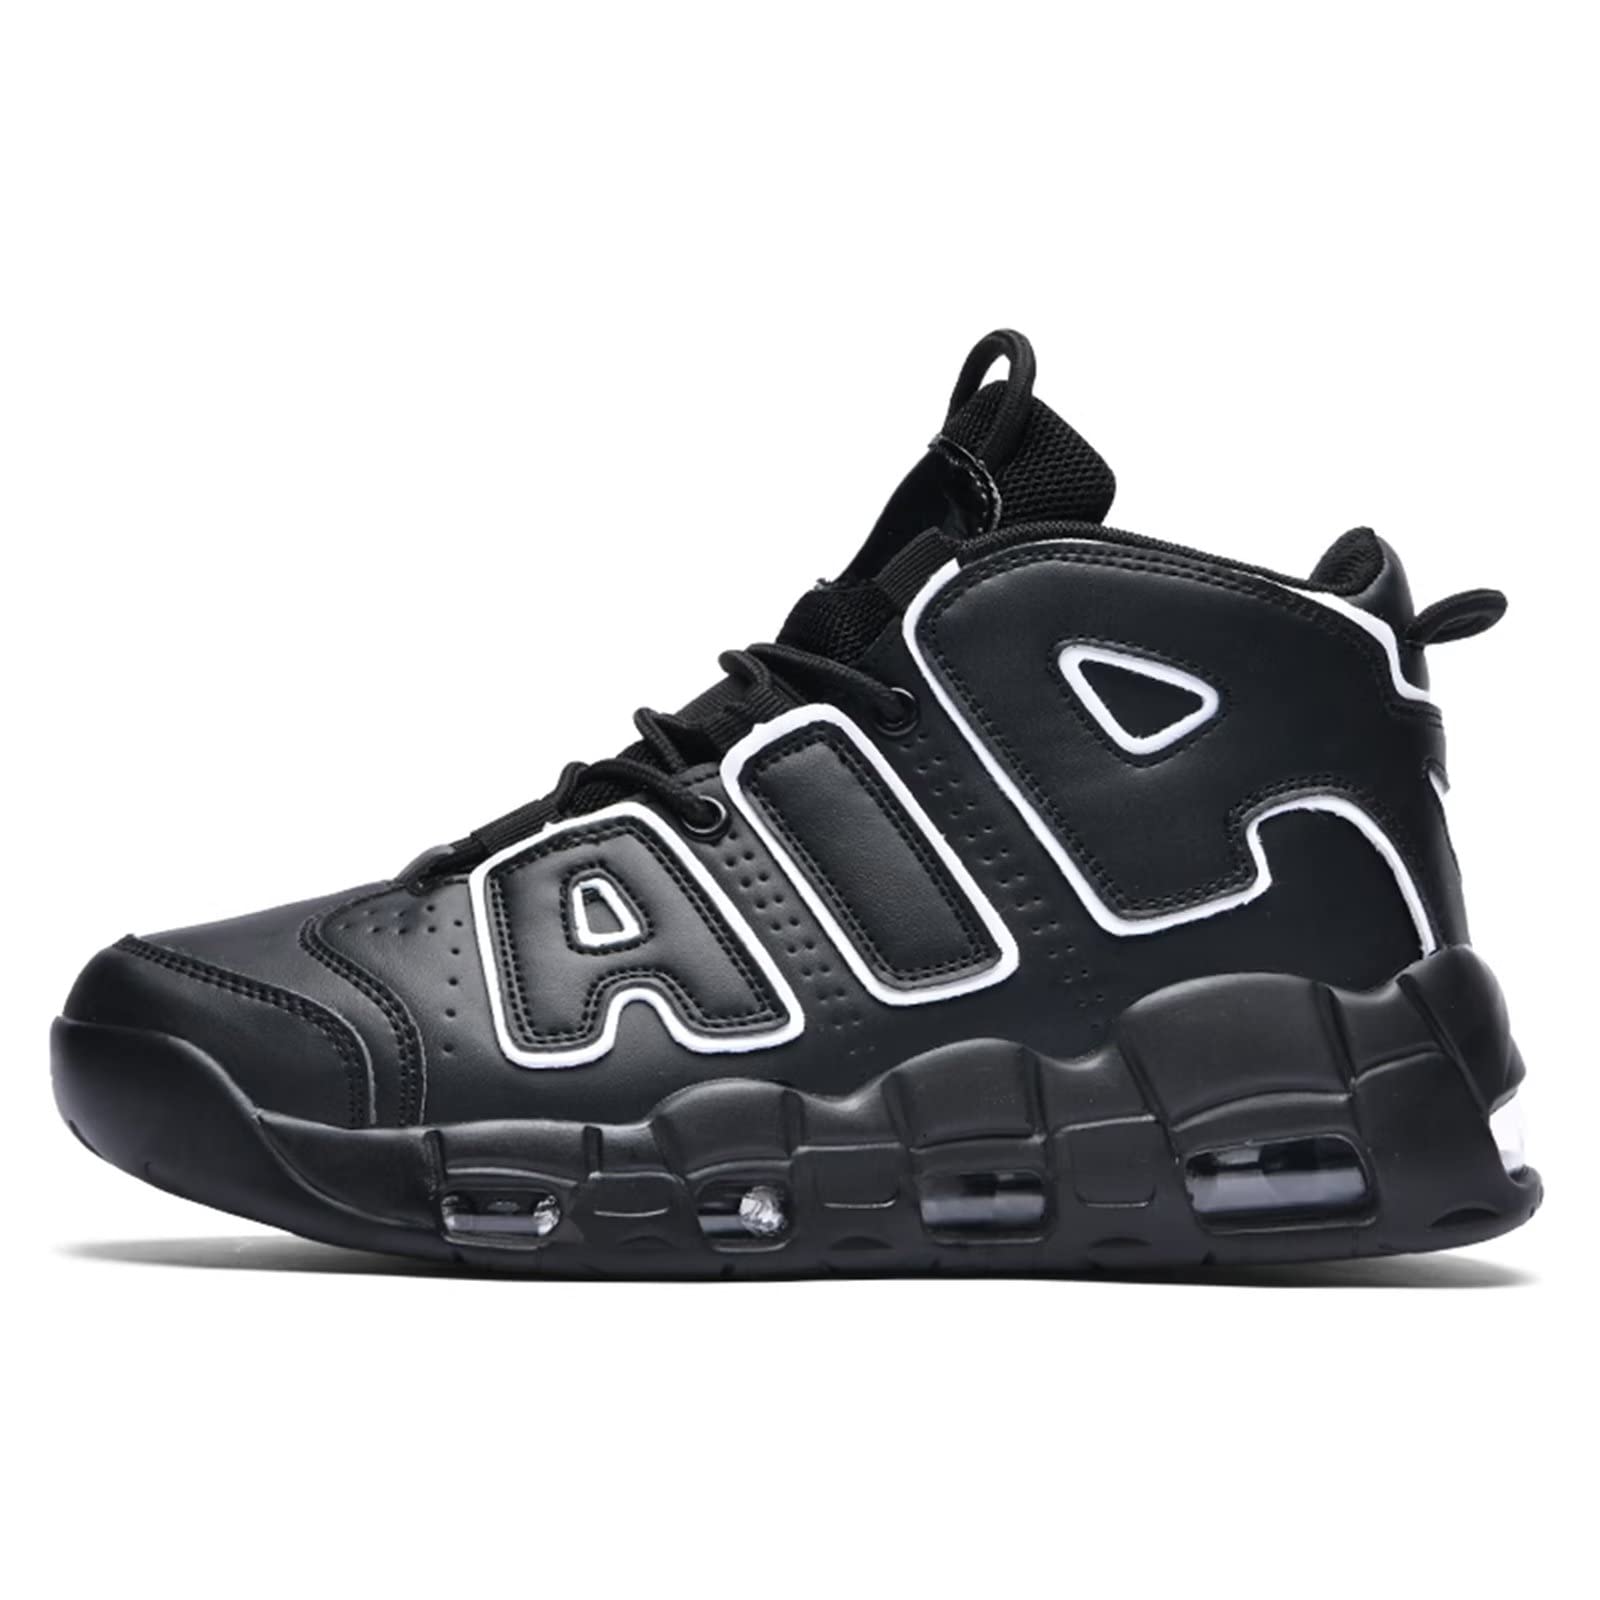 Aszeller Men's Air More Uptempo '96 Running Shoes, Sports, Athletic Shoes, Cushioned Jogging Shoes, Casual, Daily Travel, Shoes for Men